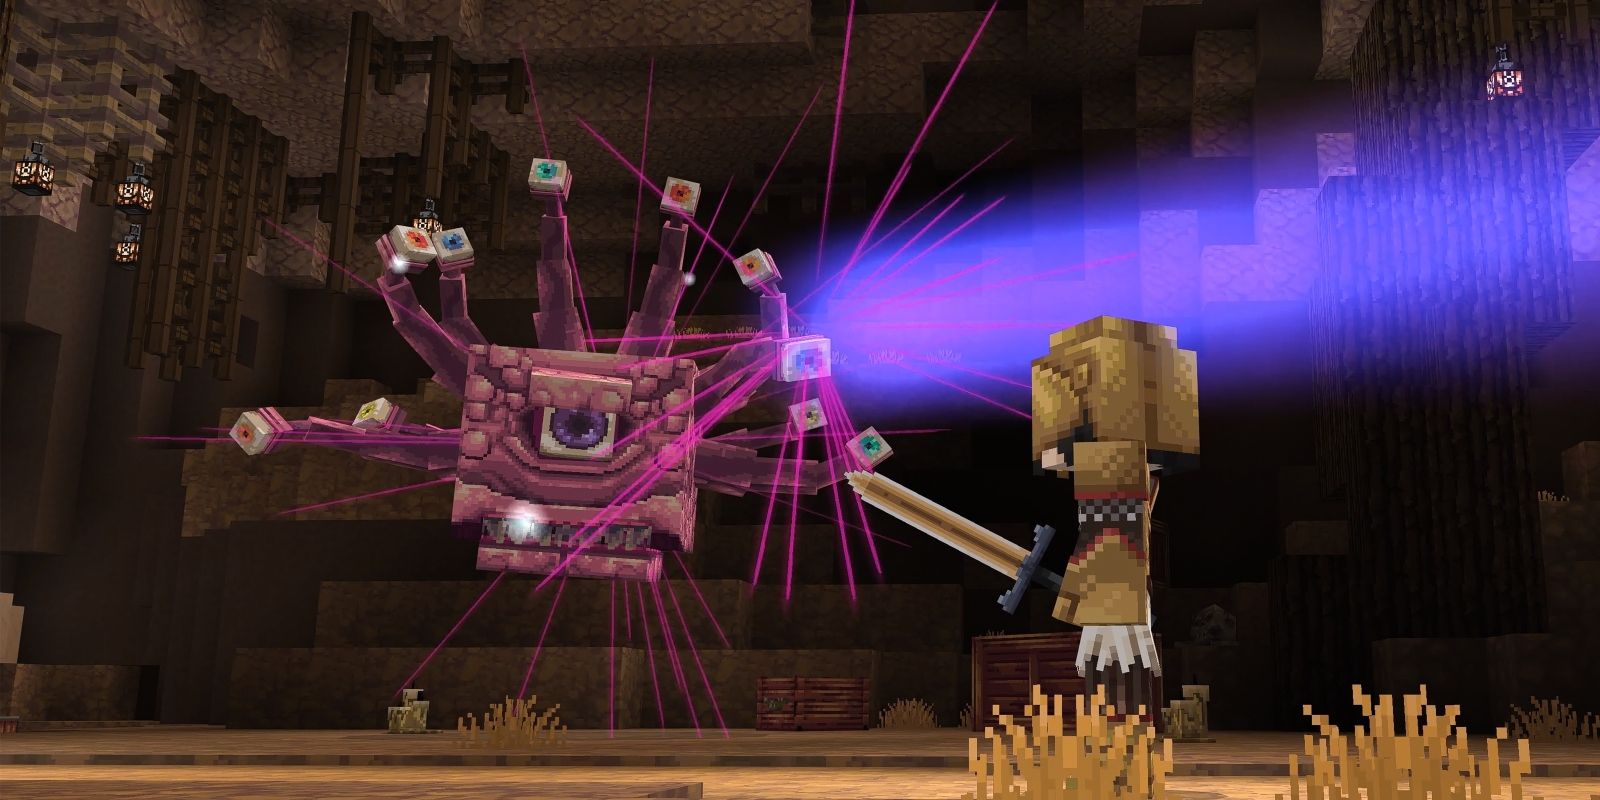 A Minecraft character with a sword facing off against a beholder